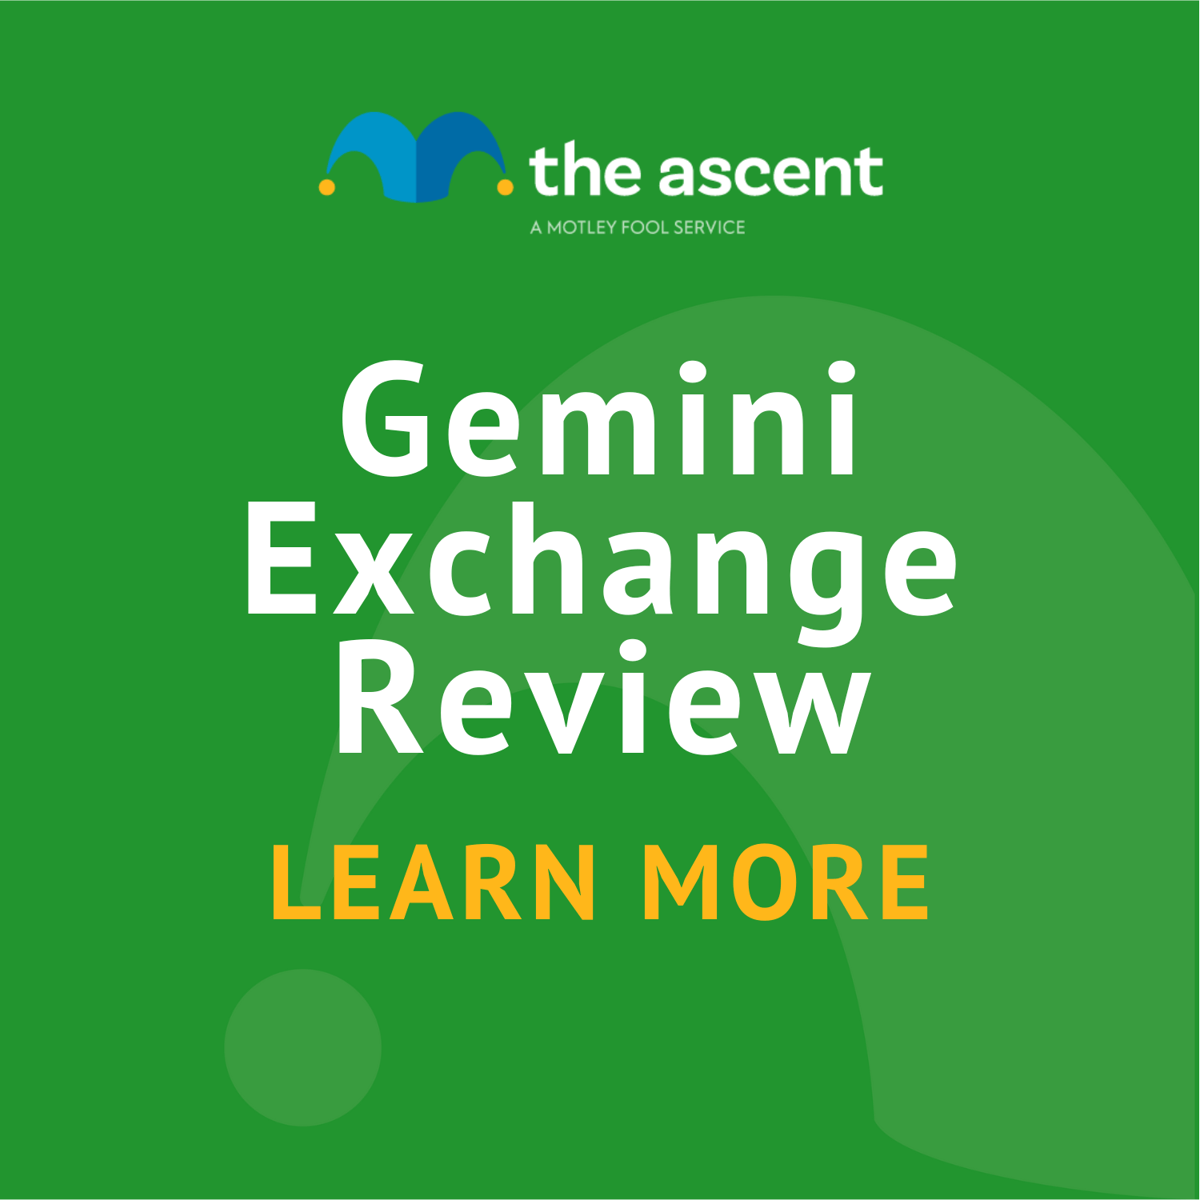 Gemini Vs. Coinbase: Which Is Best?